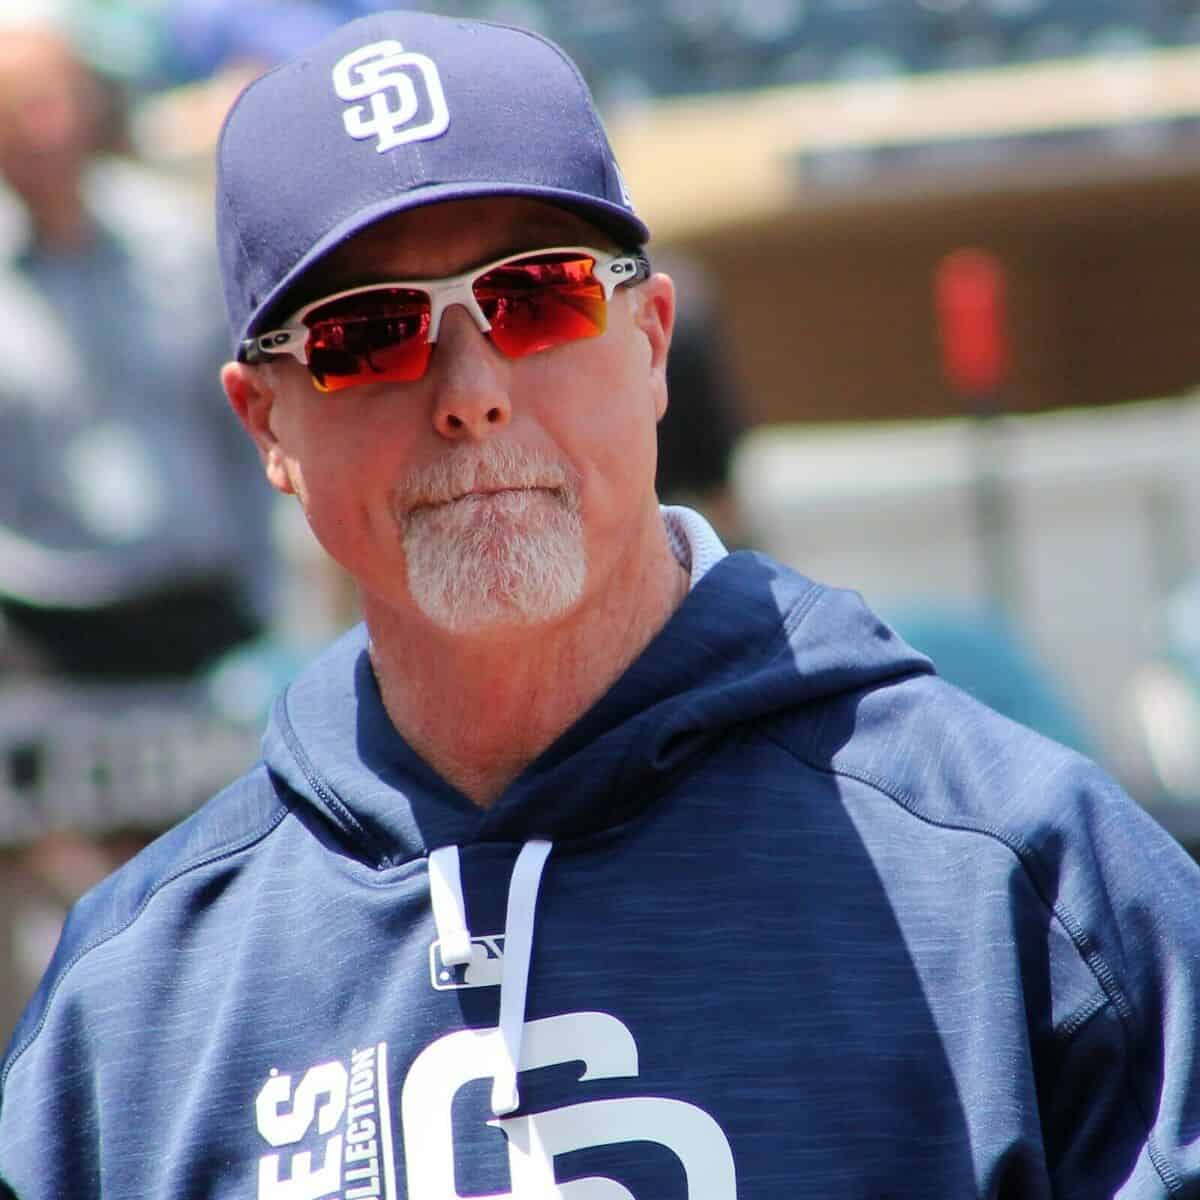 Mark McGwire Net Worth Details, Personal Info